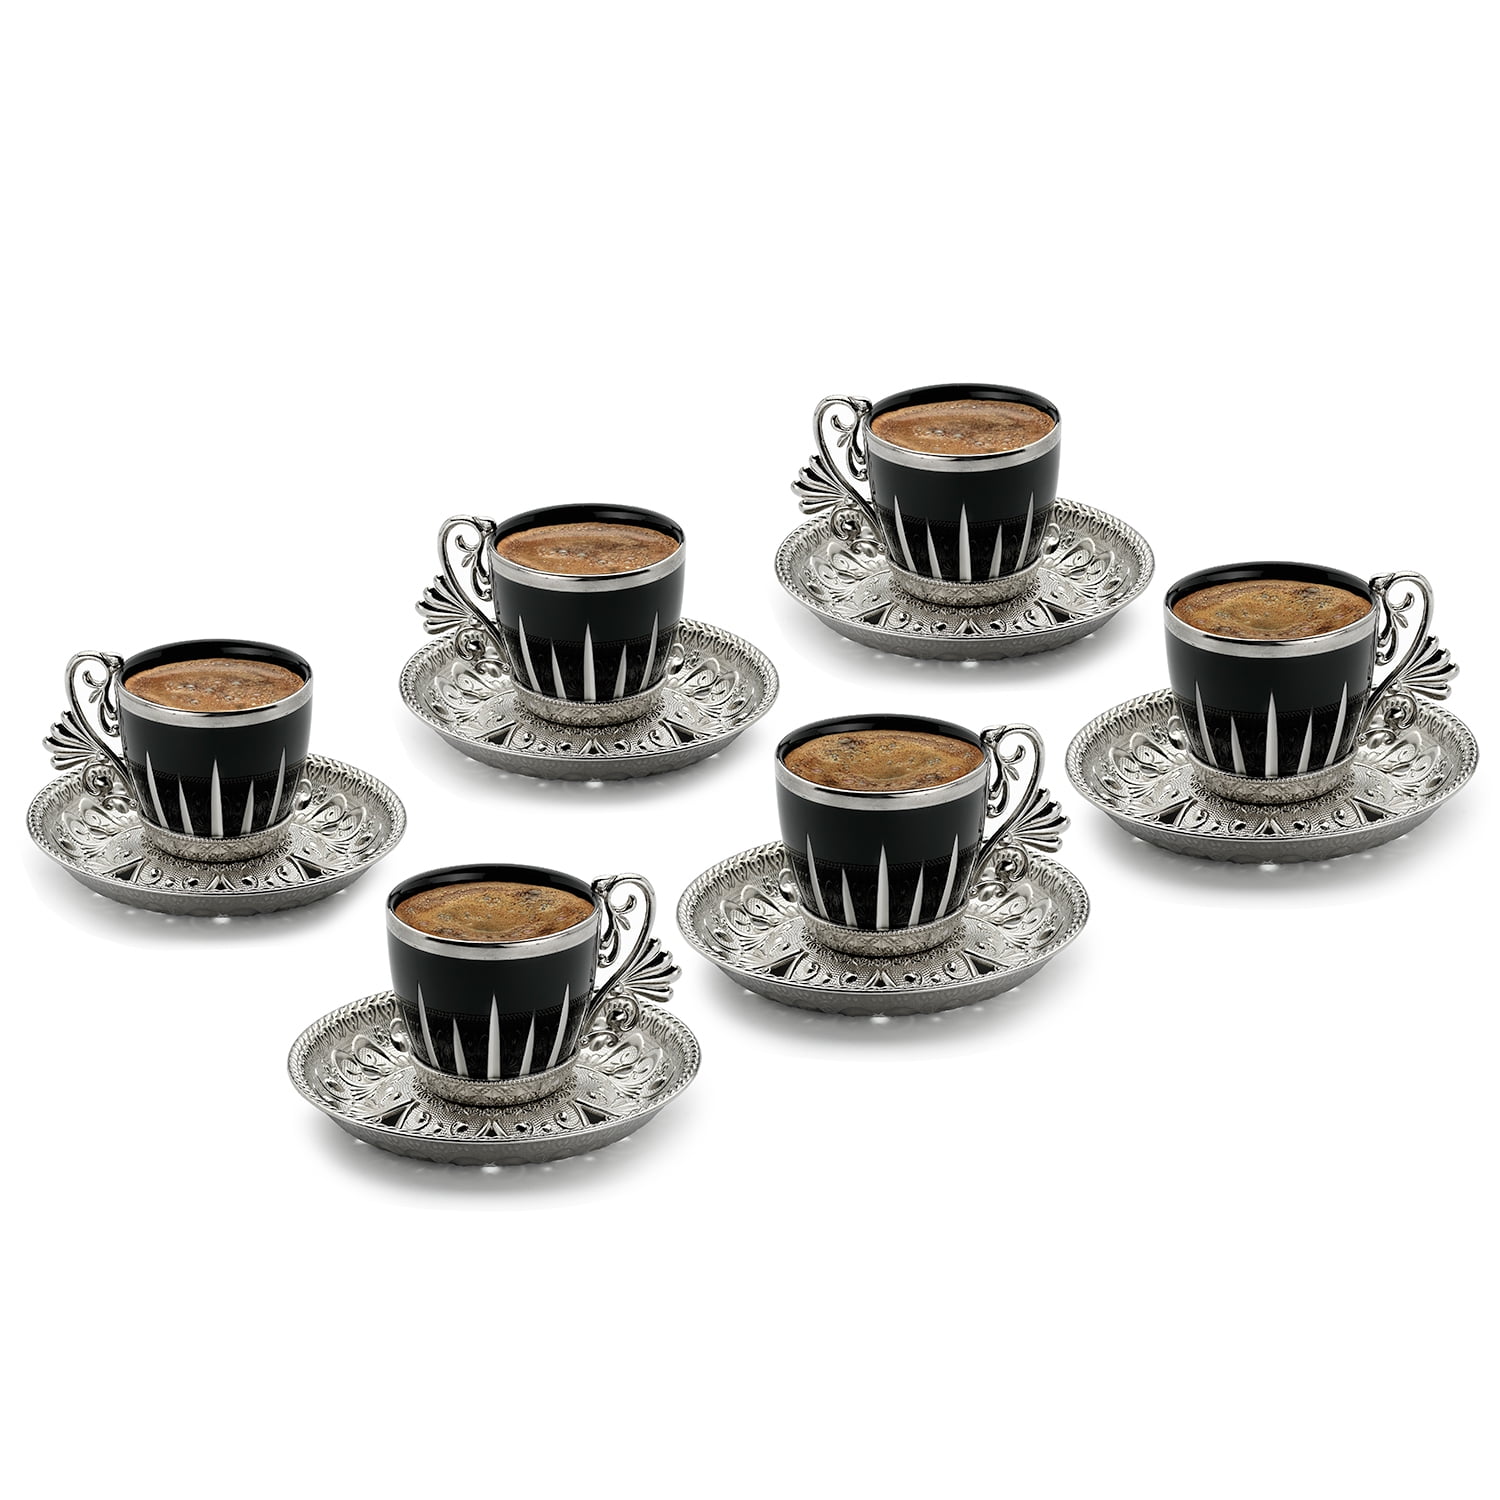 Turkish Espresso Coffee Cups Set 6 Pieces Bohemia Ceramic Coffee Mug  Drinking Cup with Handle for